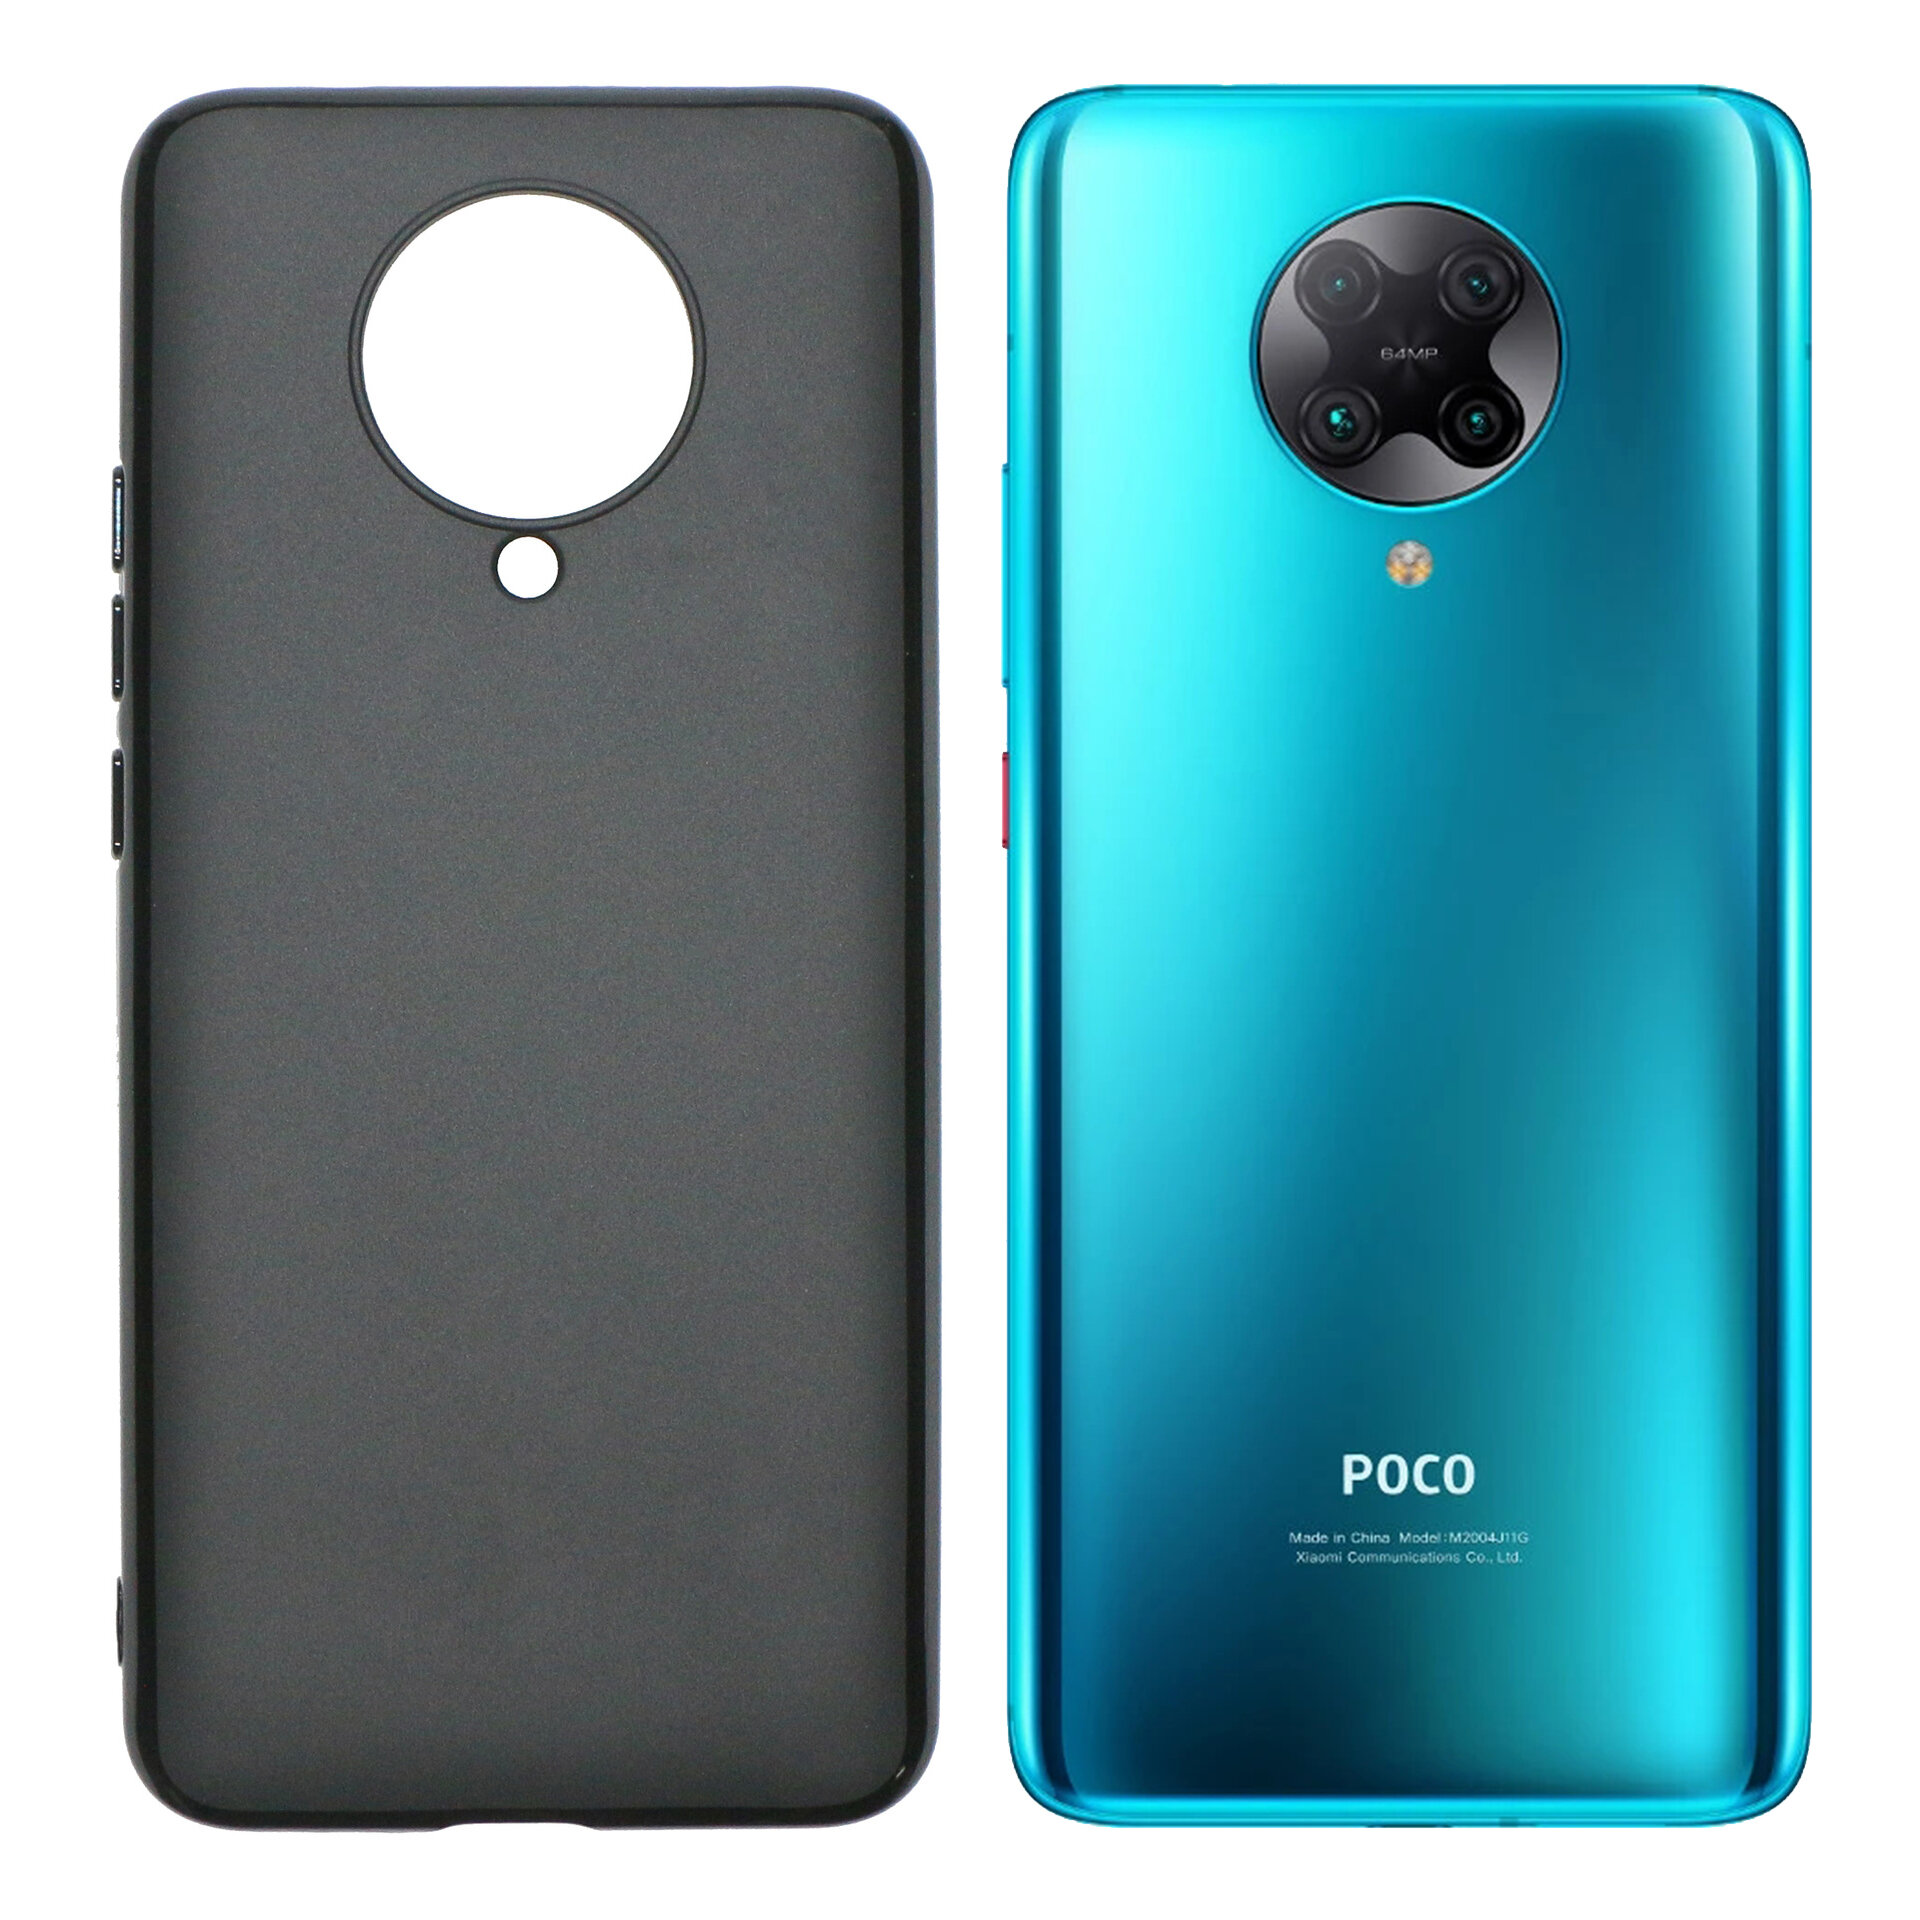 

Bakeey Pudding Frosted Shockproof Ultra-thin Non-yellow Soft TPU Protective Case for POCO F2 Pro / Xiaomi Redmi K30 Pro